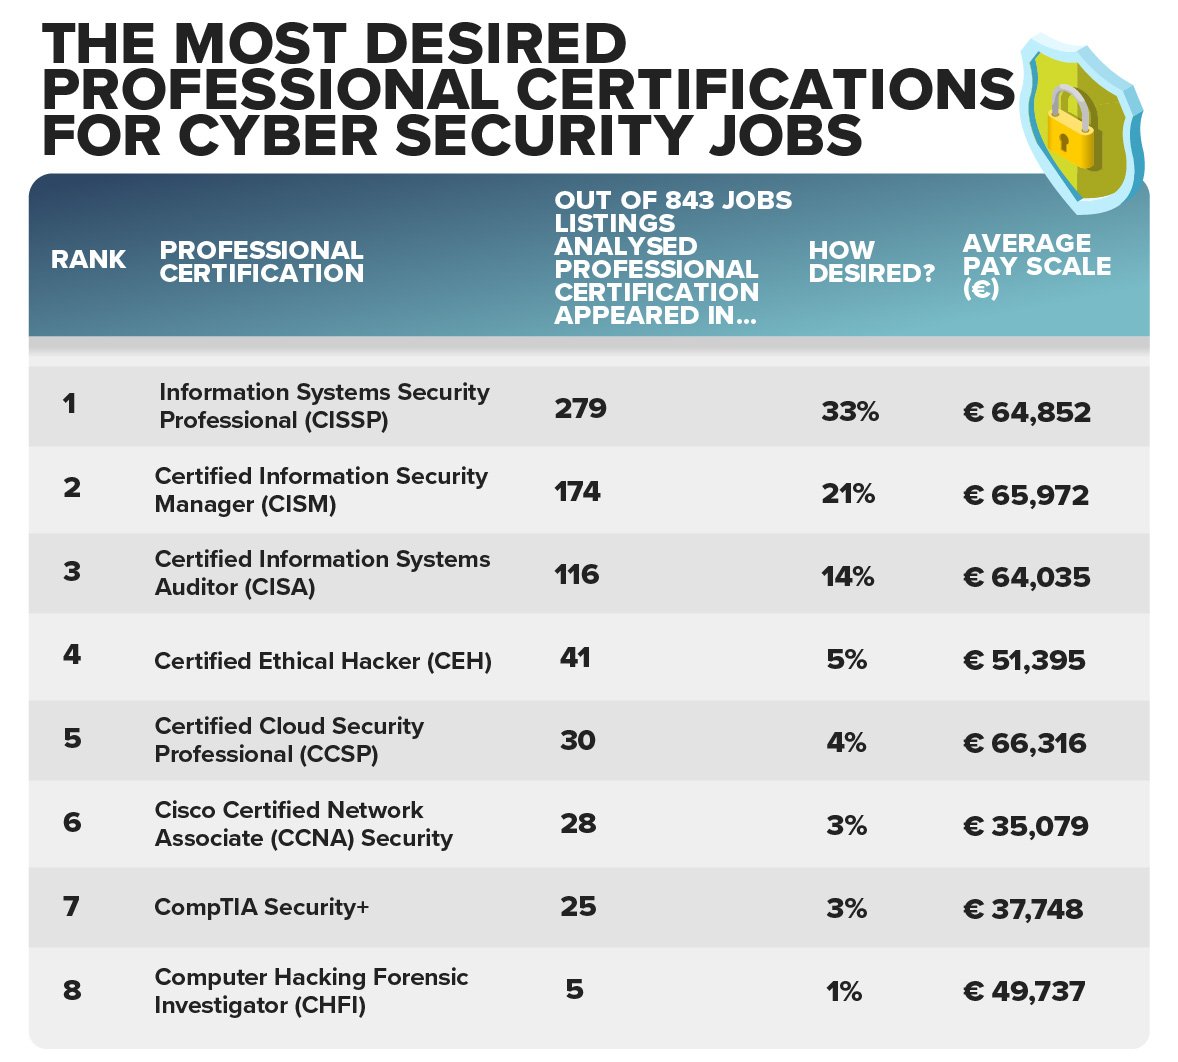 Over 800 cyber security jobs analysed MOST desired skills